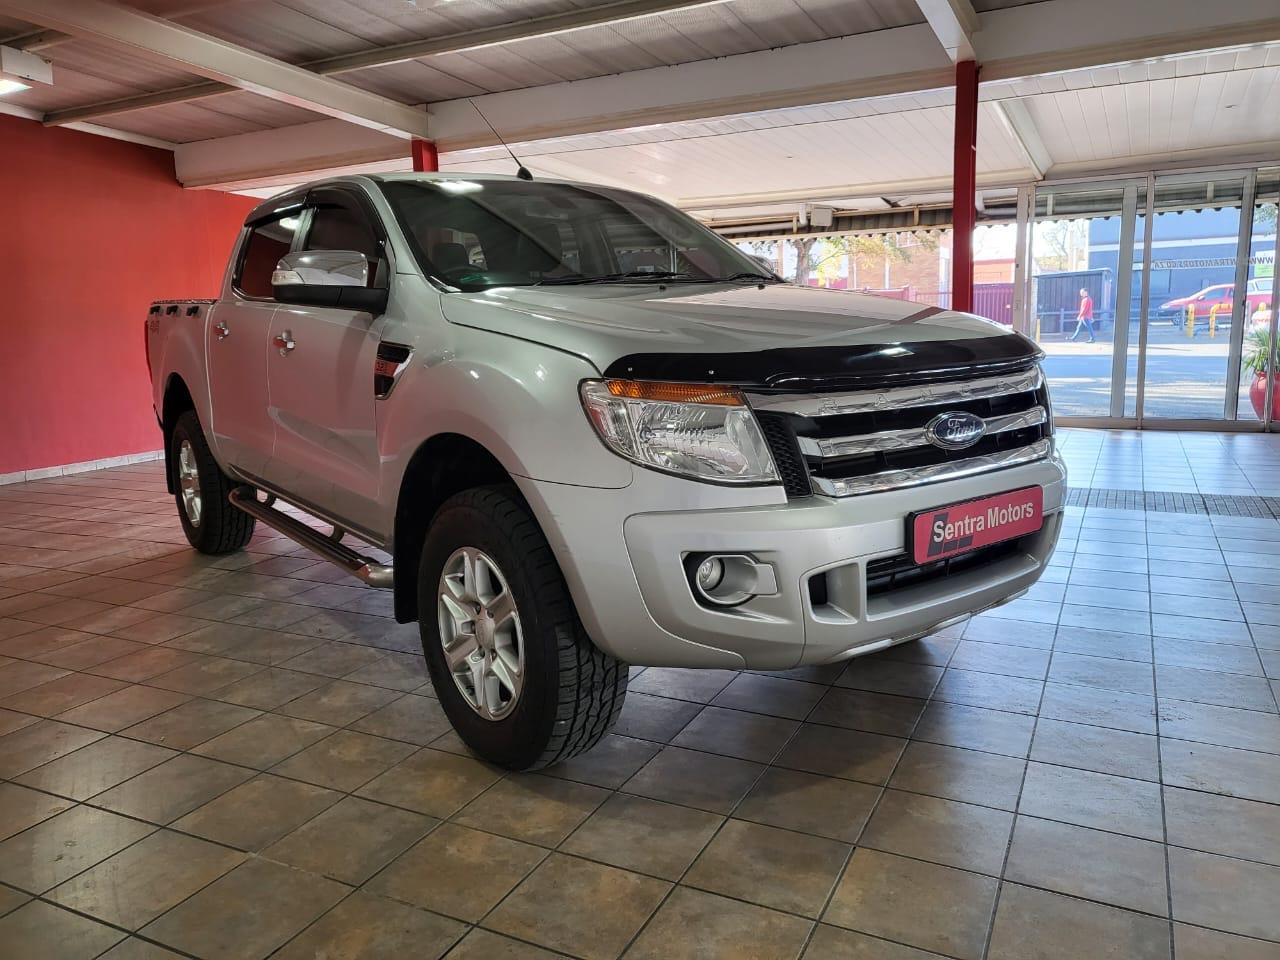 2014 Ford Ranger 3.2TDCi Double Cab 4x4 XLT For Sale